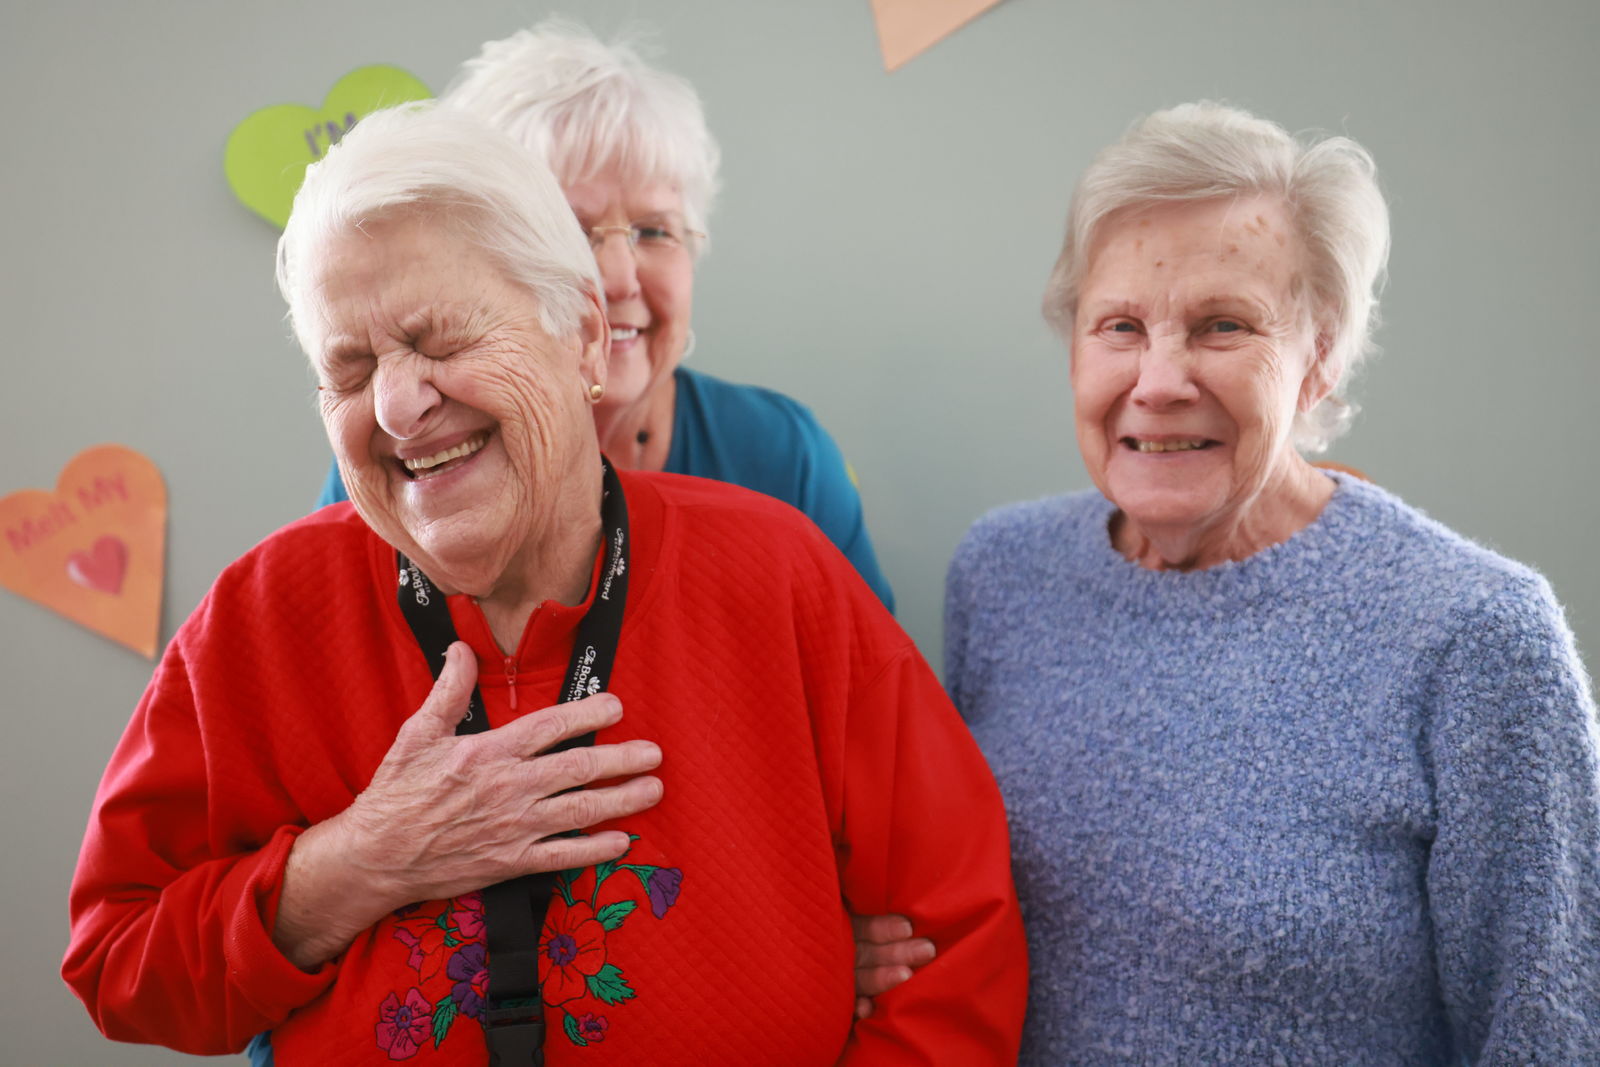 Senior women who live at an Arrow Senior Living community smiling and laughing together, celebrating Galentines day